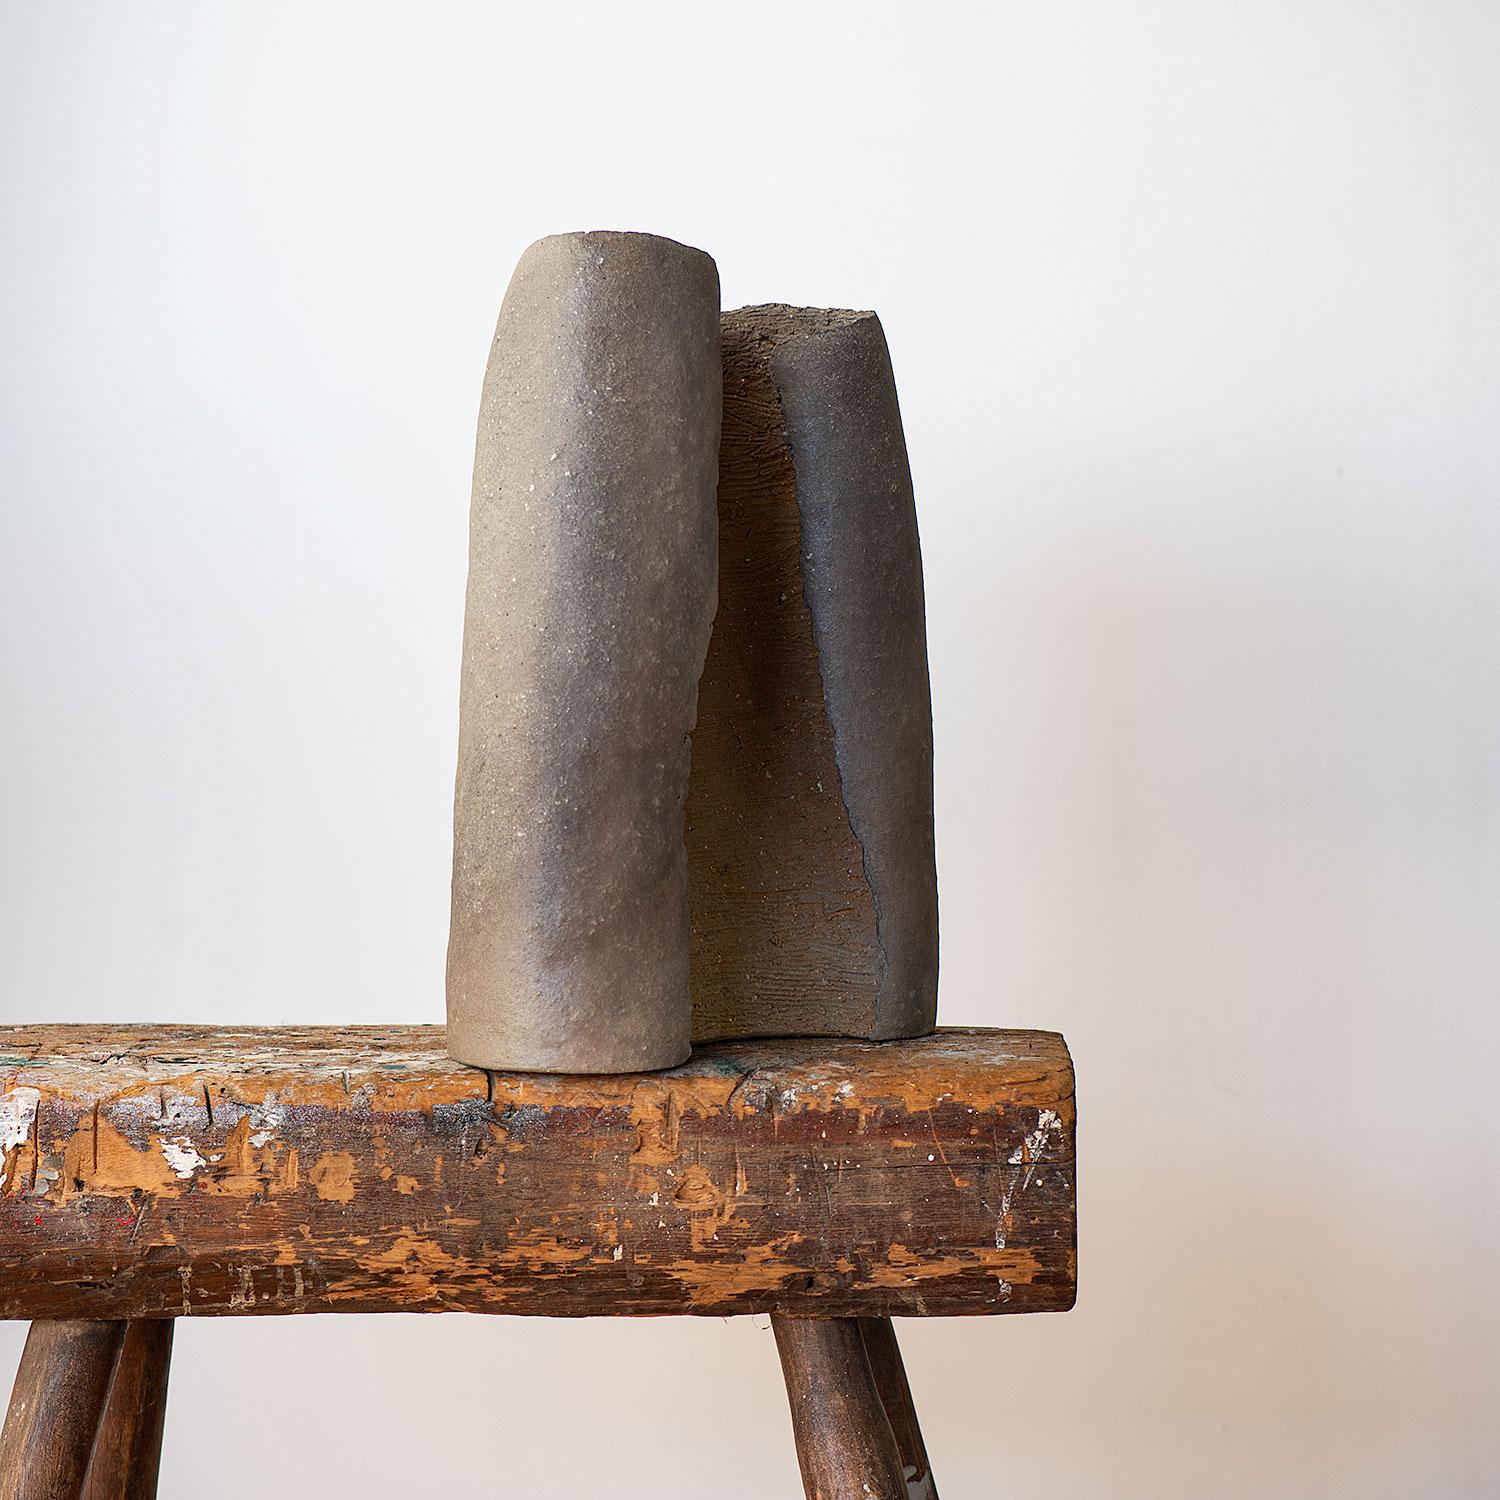 Yasuhisa Kohyama shapes his asymmetrical forms using piano wire, creating distinctive rough surfaces. The clay with its feldspar nuggets creates a tactile quality rarely seen in contemporary work. No glaze is used, but the wood ash and placement in